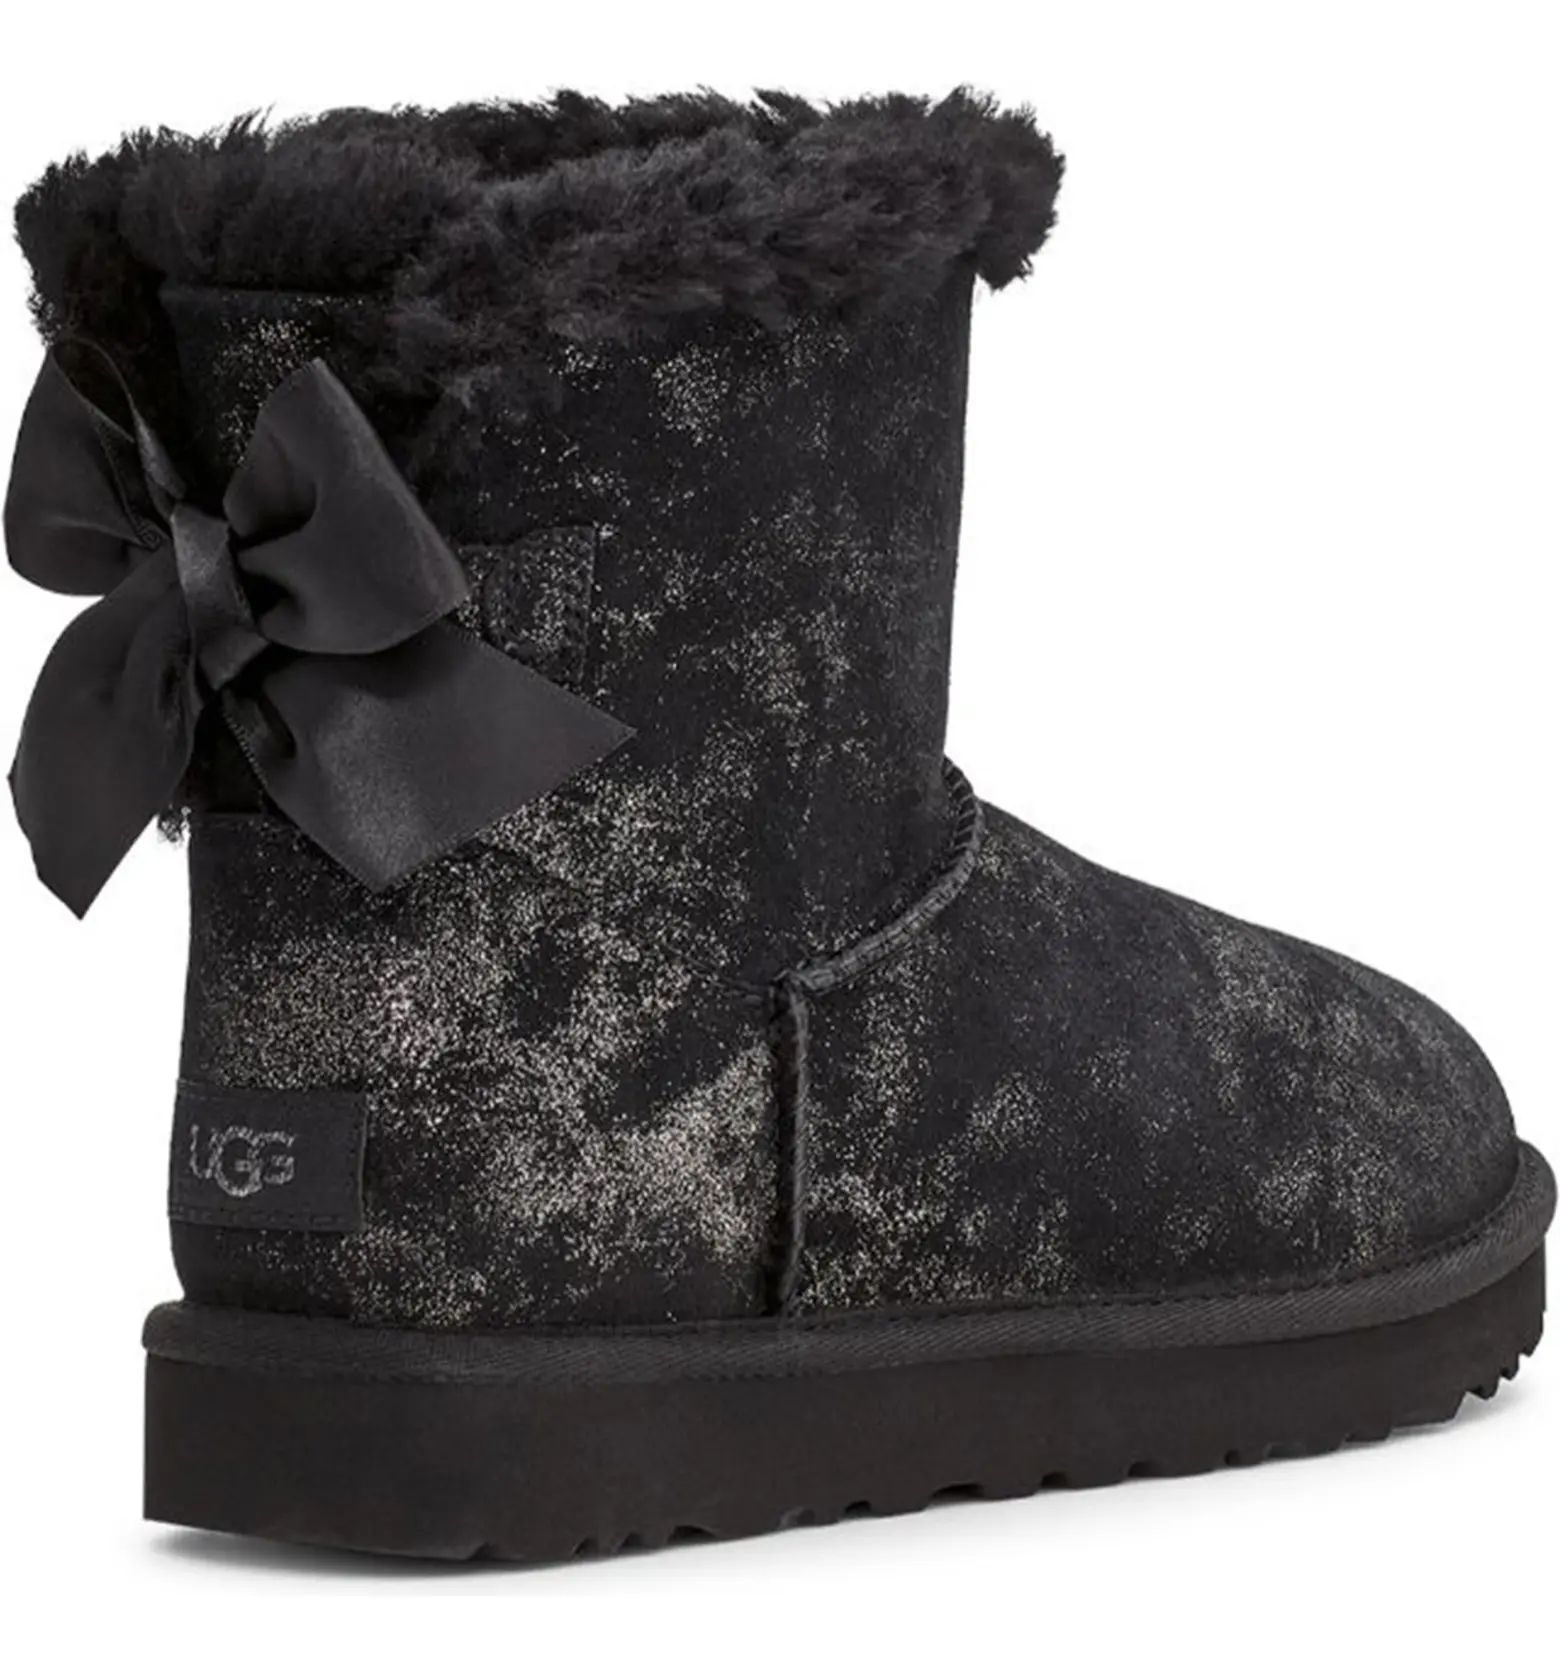 Mini Bailey Bow Glimmer Faux Fur Lined Boot | Nordstrom Rack